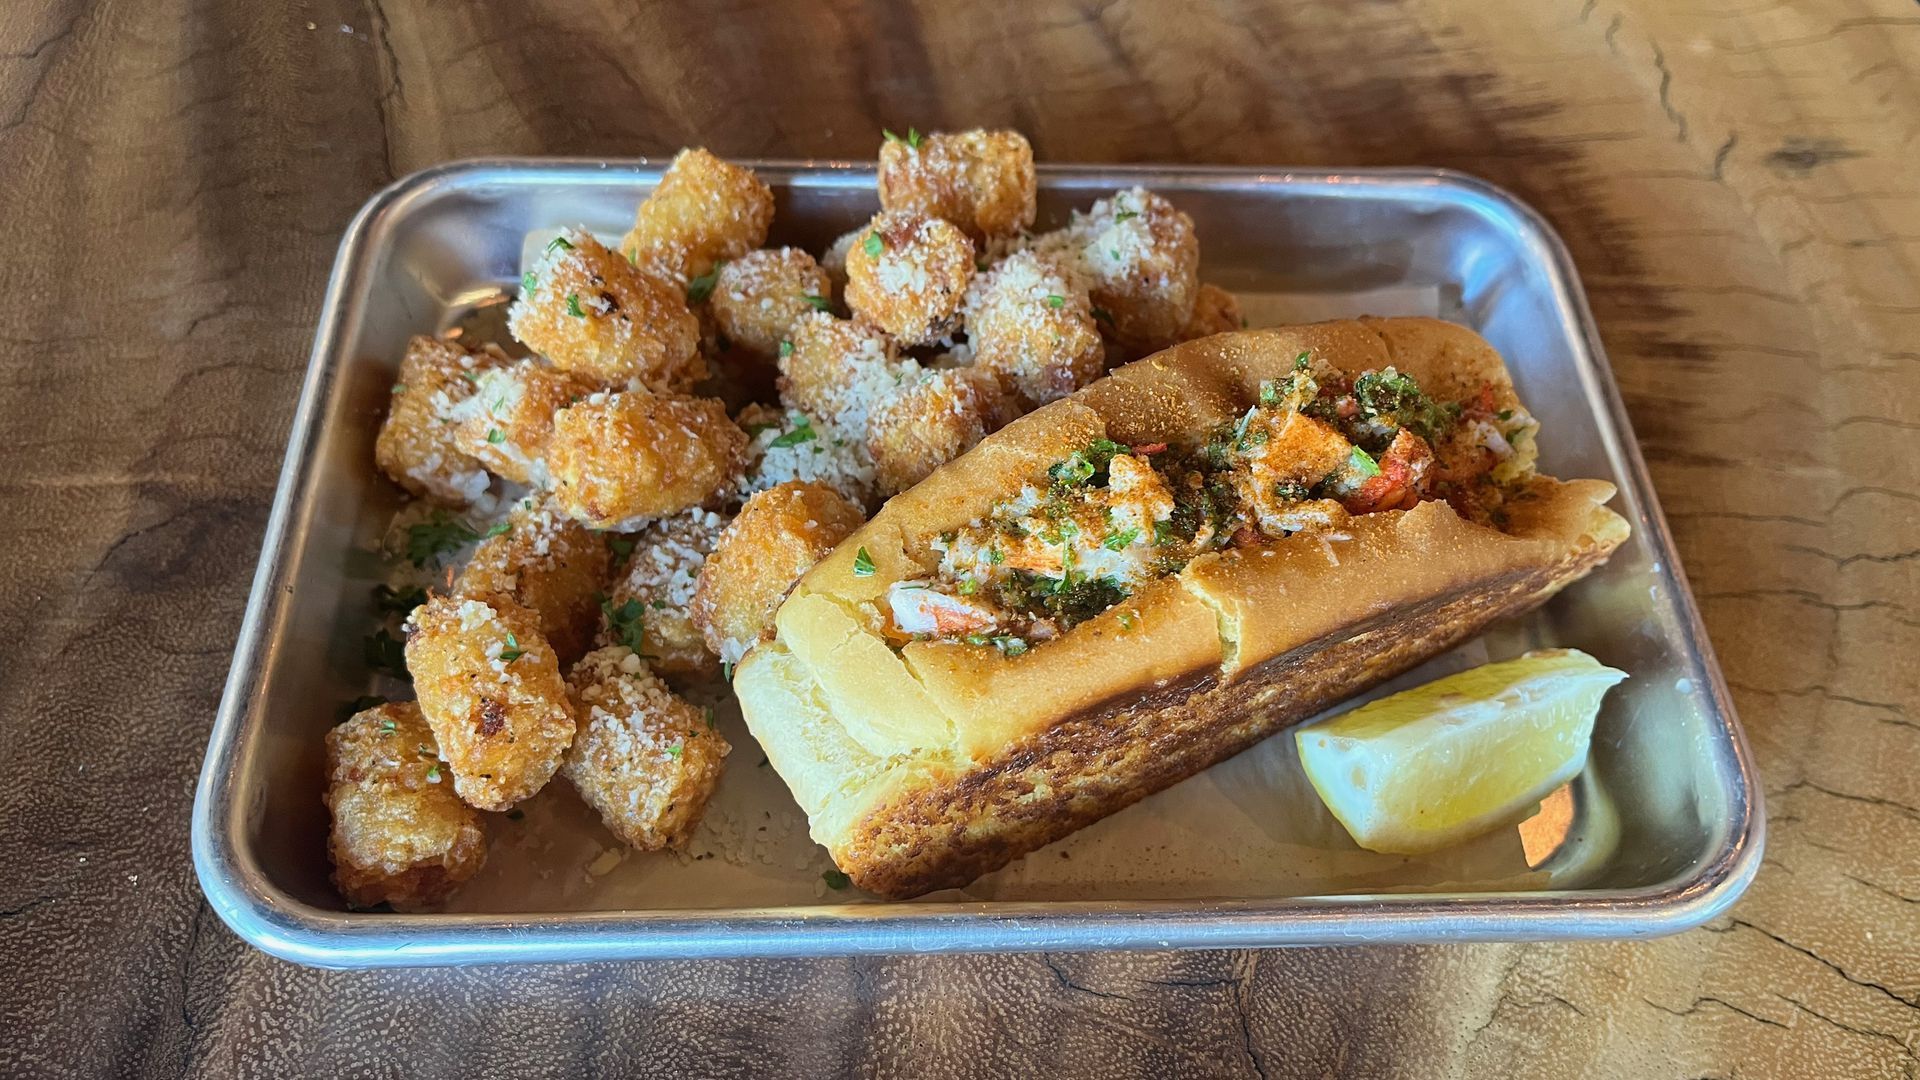 A lobster roll with tater tots.